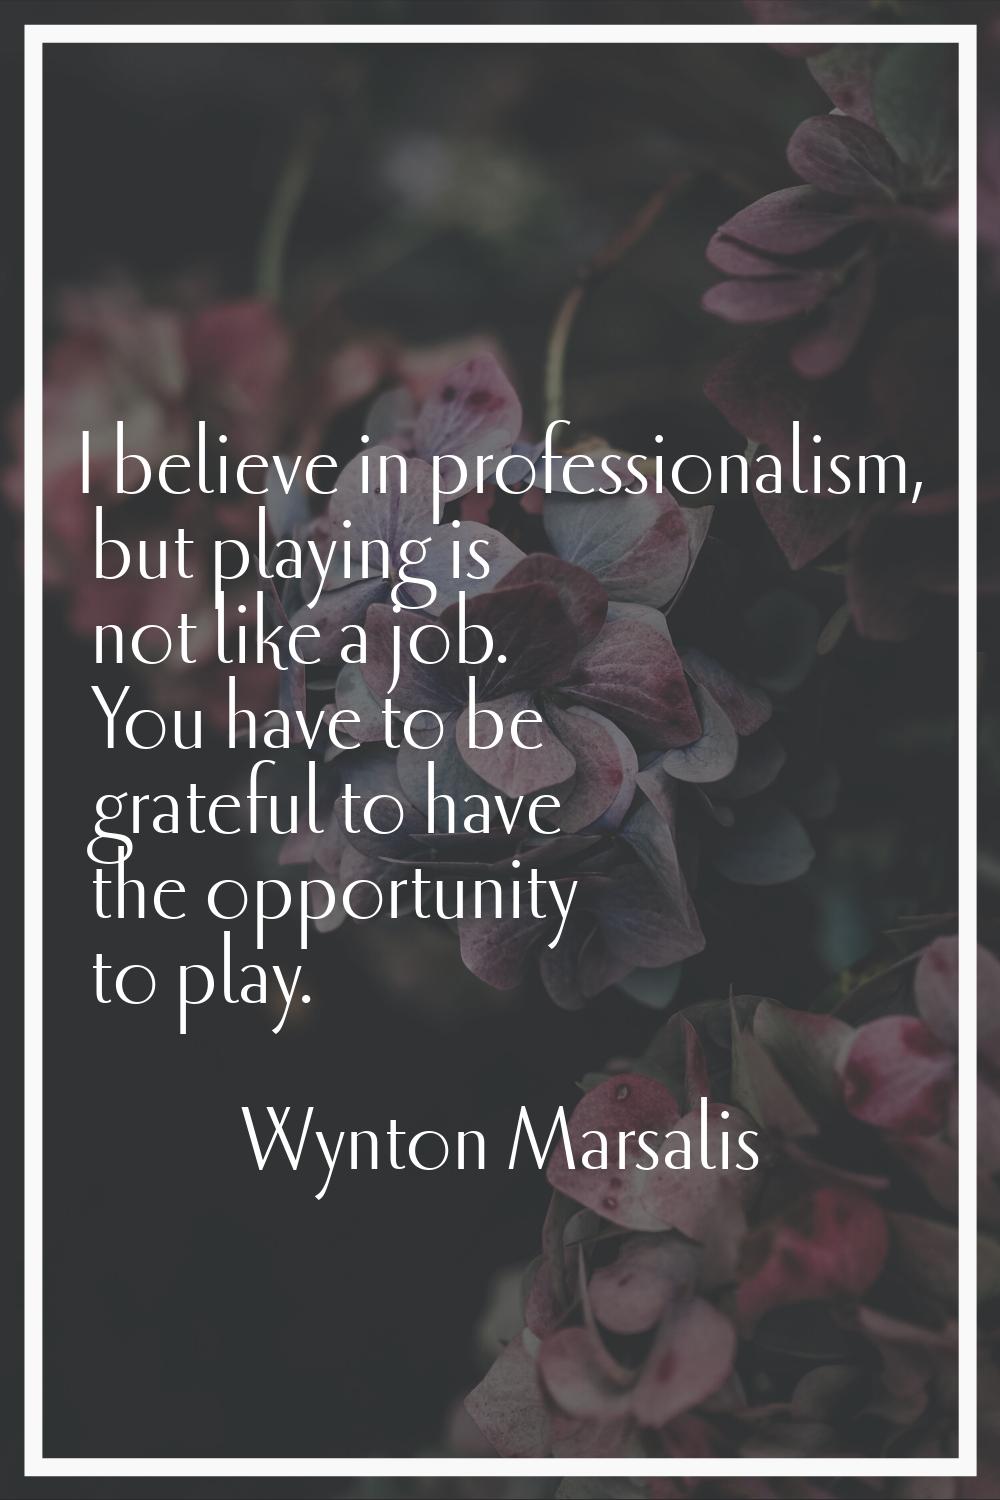 I believe in professionalism, but playing is not like a job. You have to be grateful to have the op